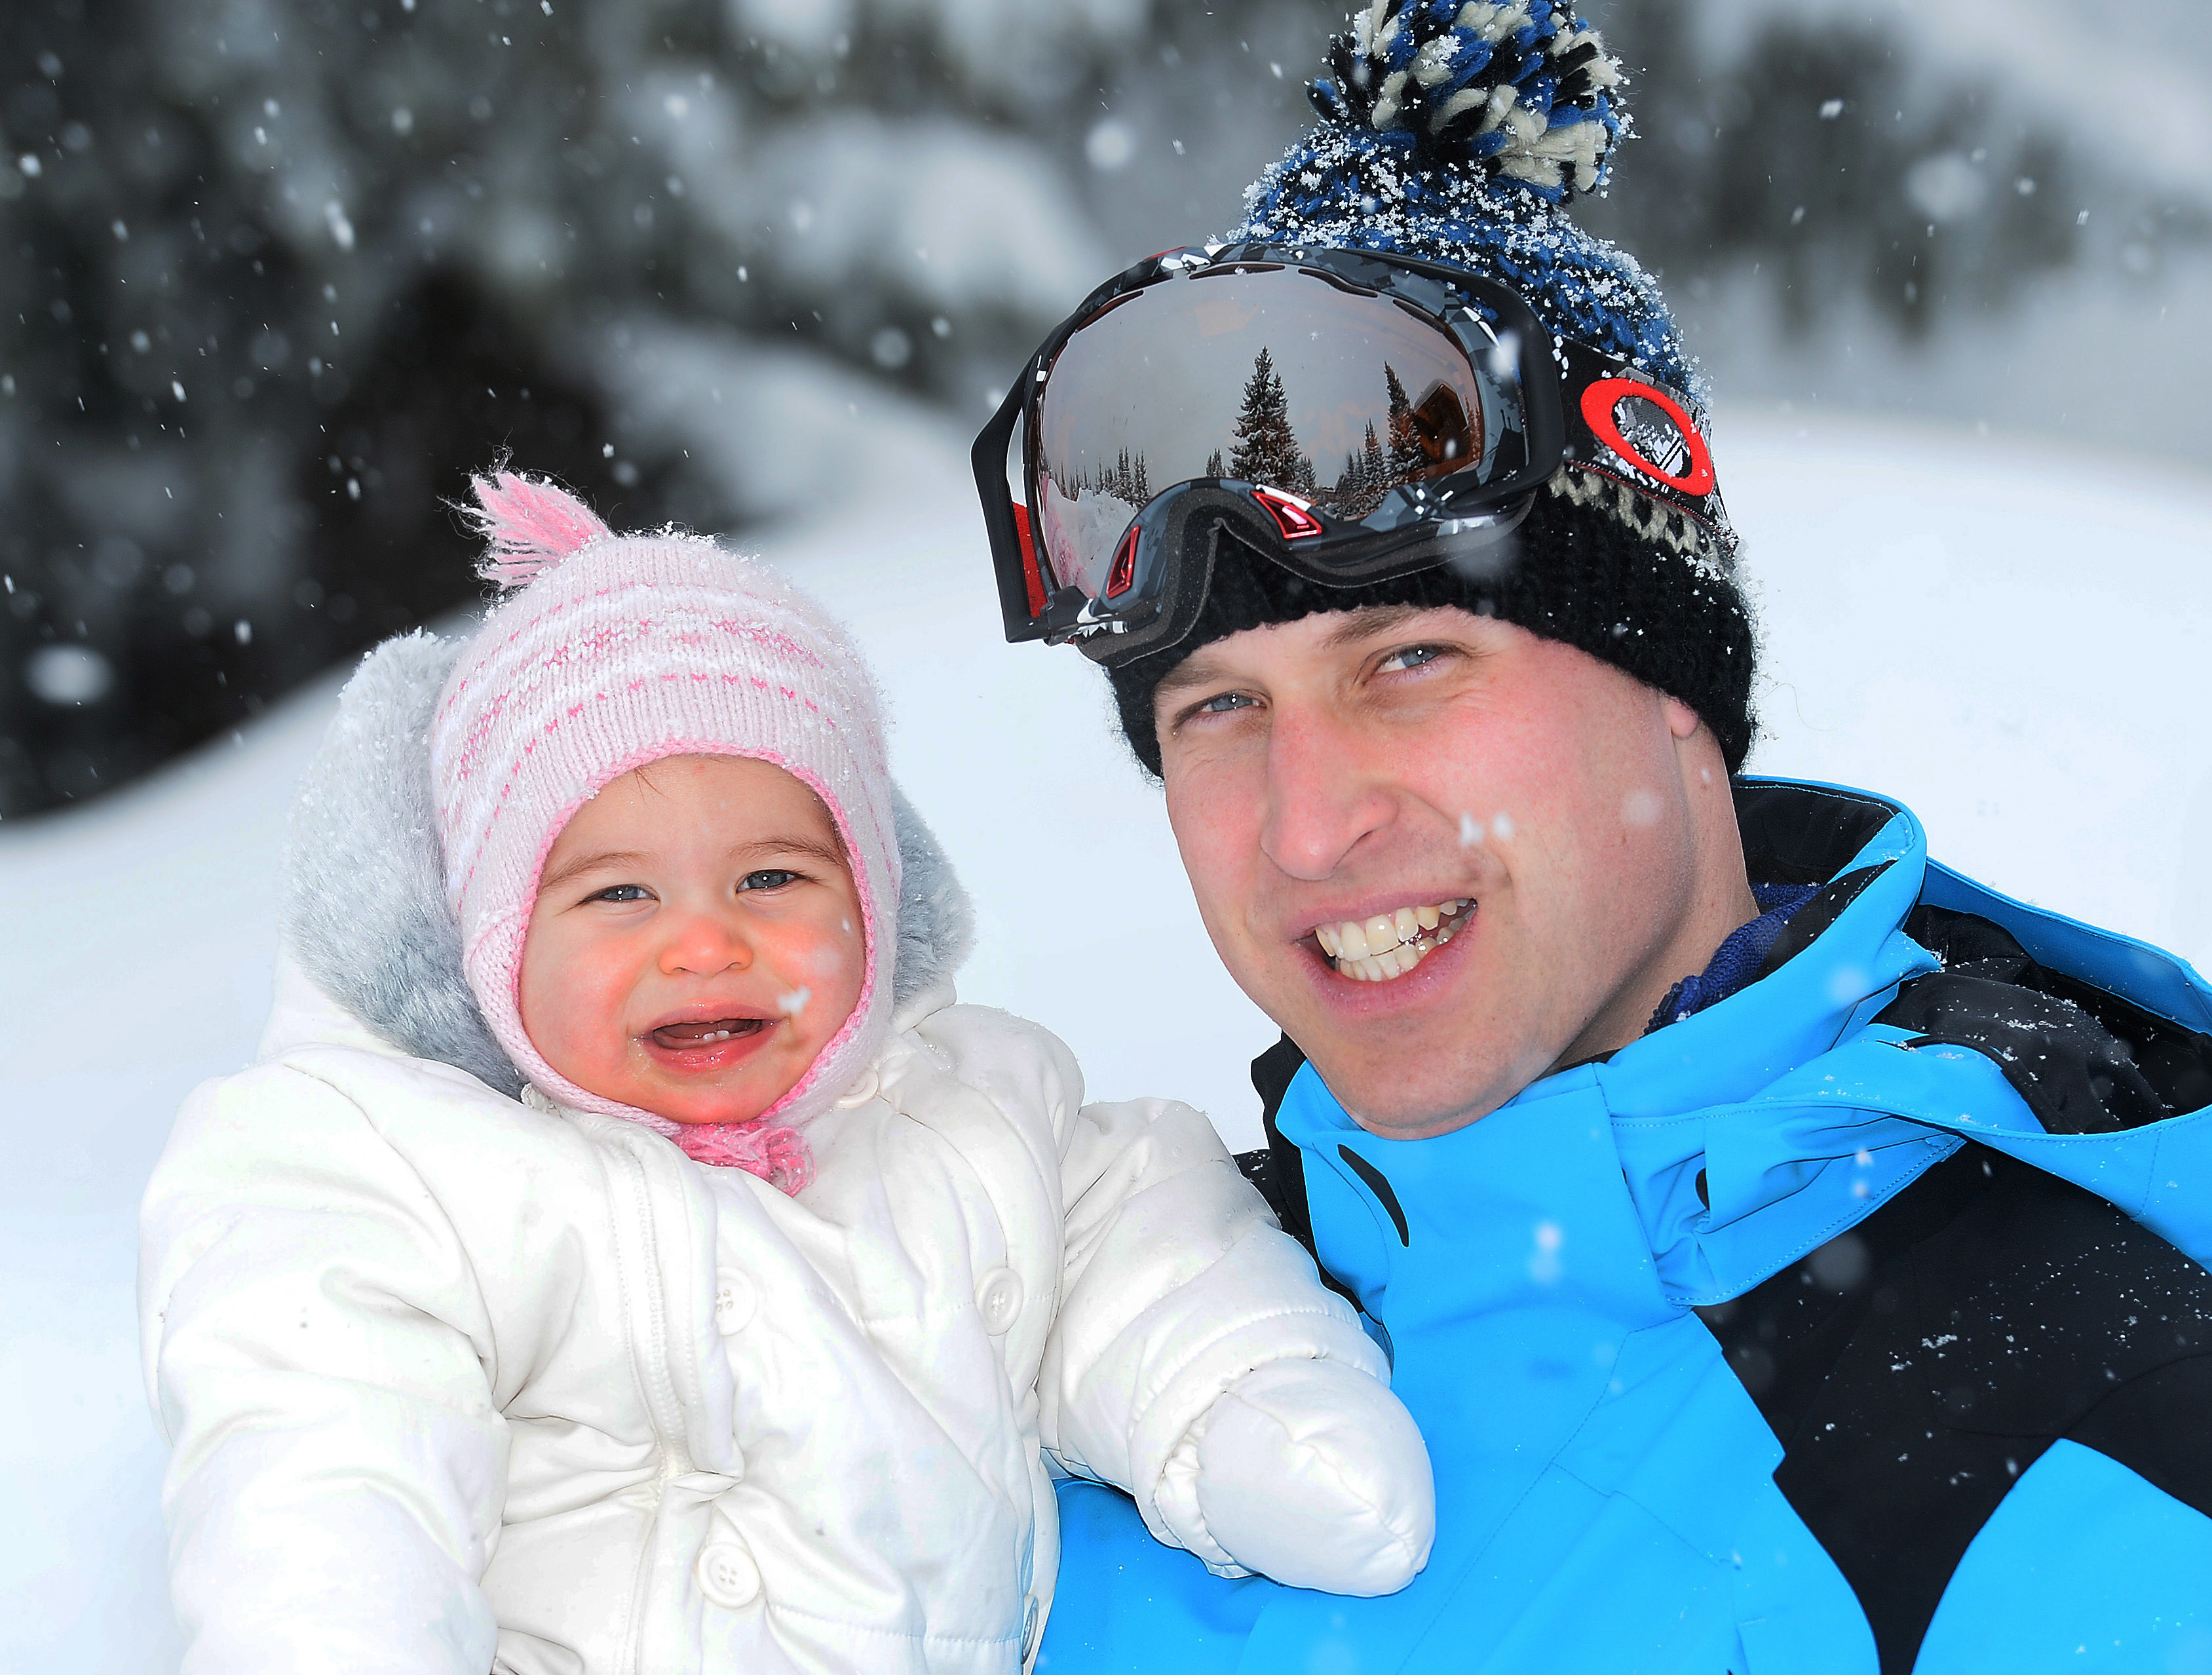 <p><a href="https://www.wonderwall.com/celebrity/profiles/overview/prince-william-482.article">Prince William</a> cuddled daughter Princess Charlotte during a family ski vacation in the French Alps on March 3, 2016.</p>